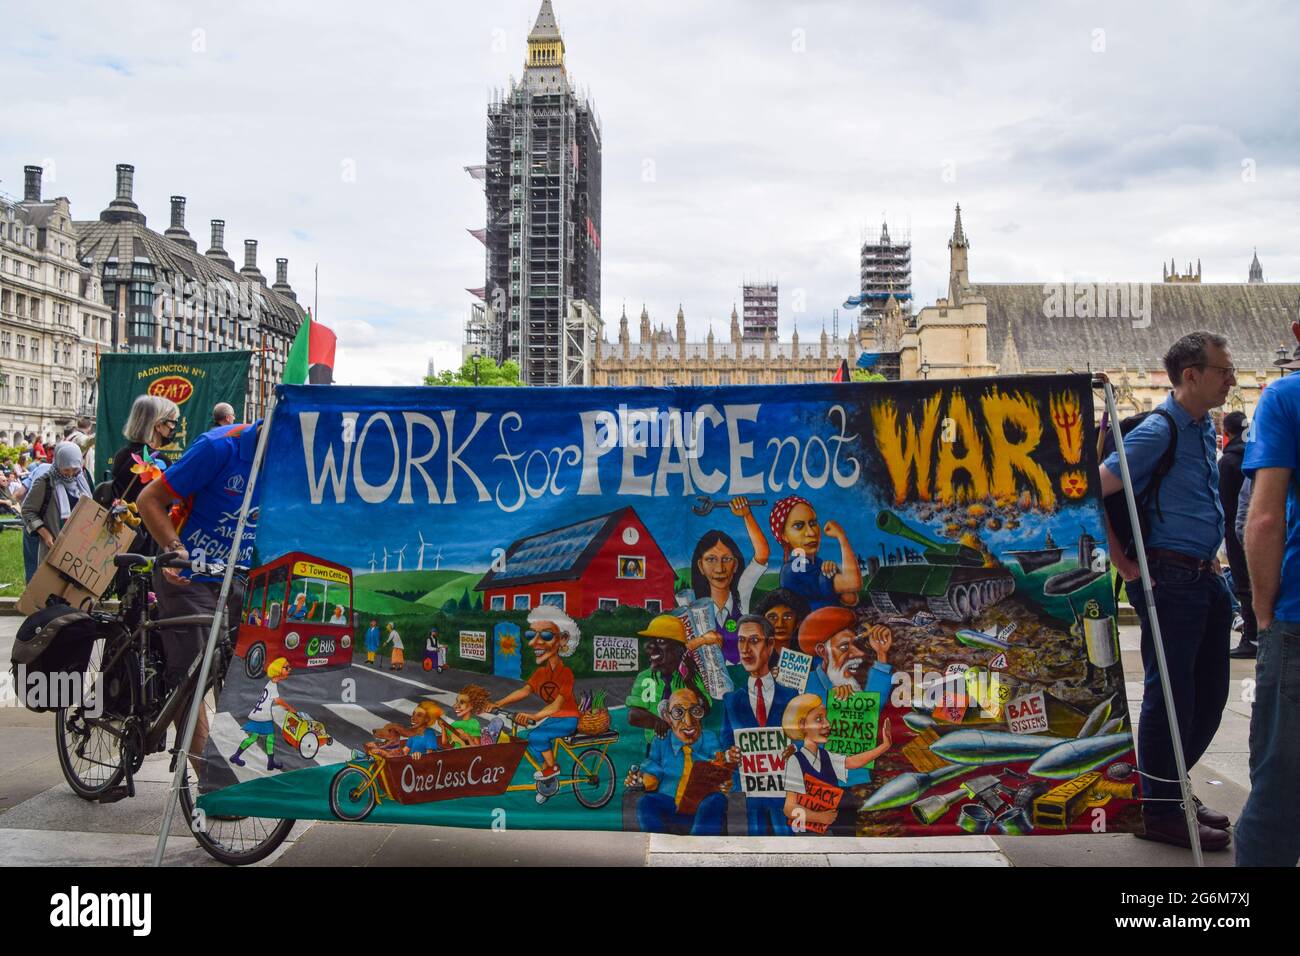 London, United Kingdom. 26th June 2021. Protesters in Parliament Square. Several protests took place in the capital, as pro-Palestine, Black Lives Matter, Kill The Bill, Extinction Rebellion, anti-Tory demonstrators, and various other groups marched through Central London. Stock Photo